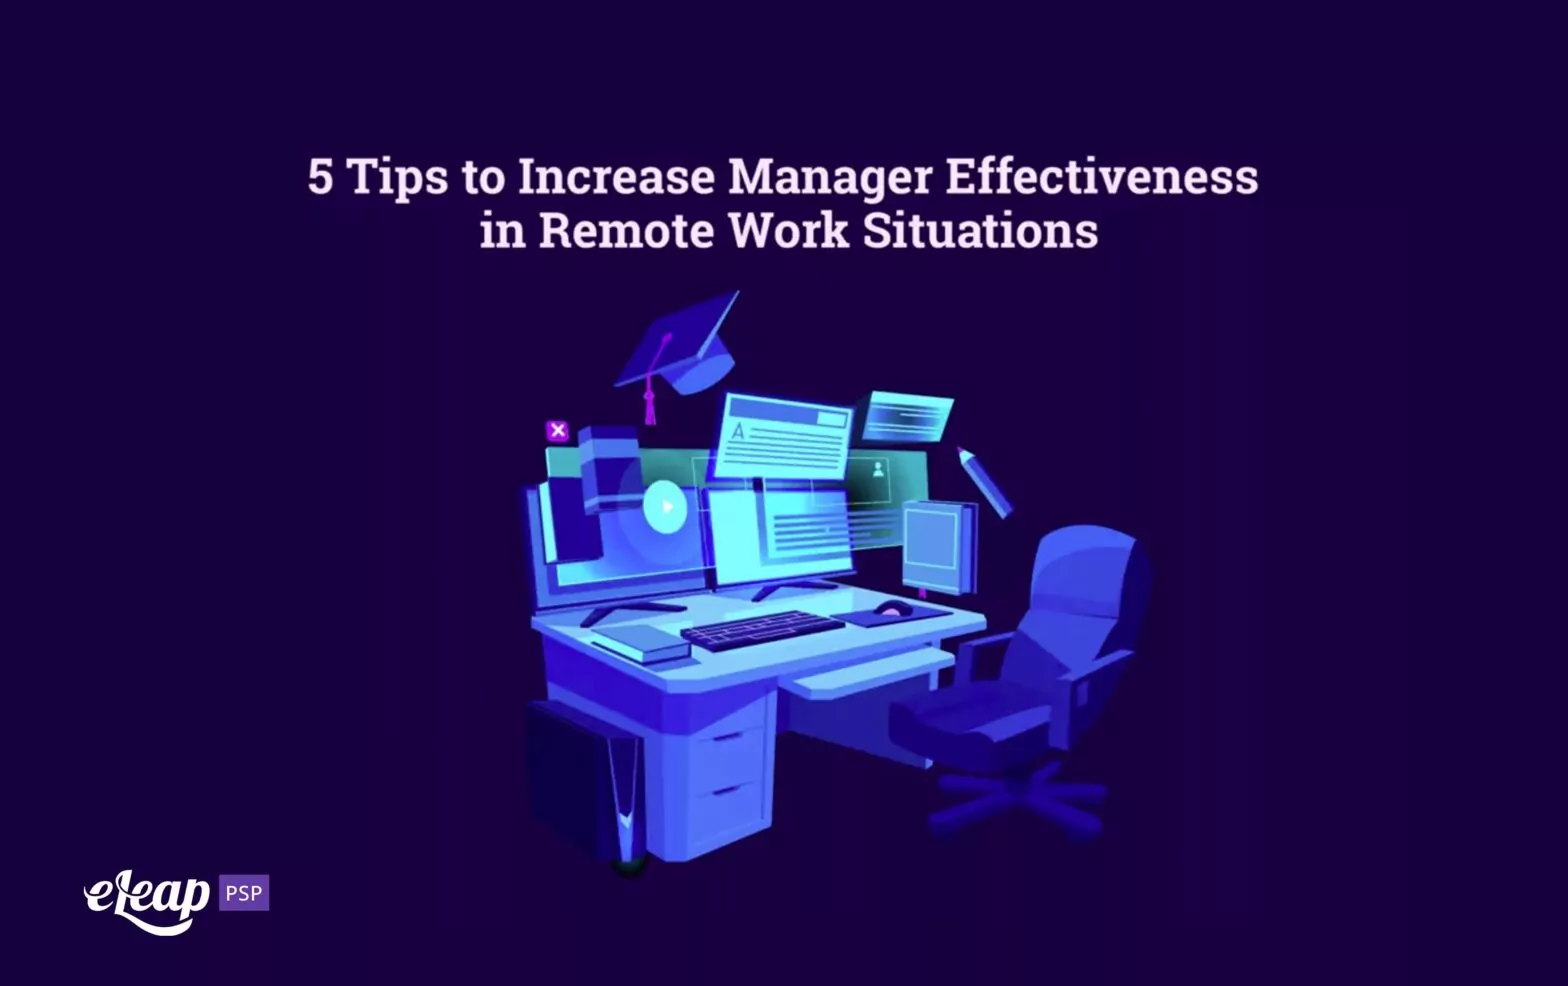 5 Tips to Increase Manager Effectiveness in Remote Work Situations